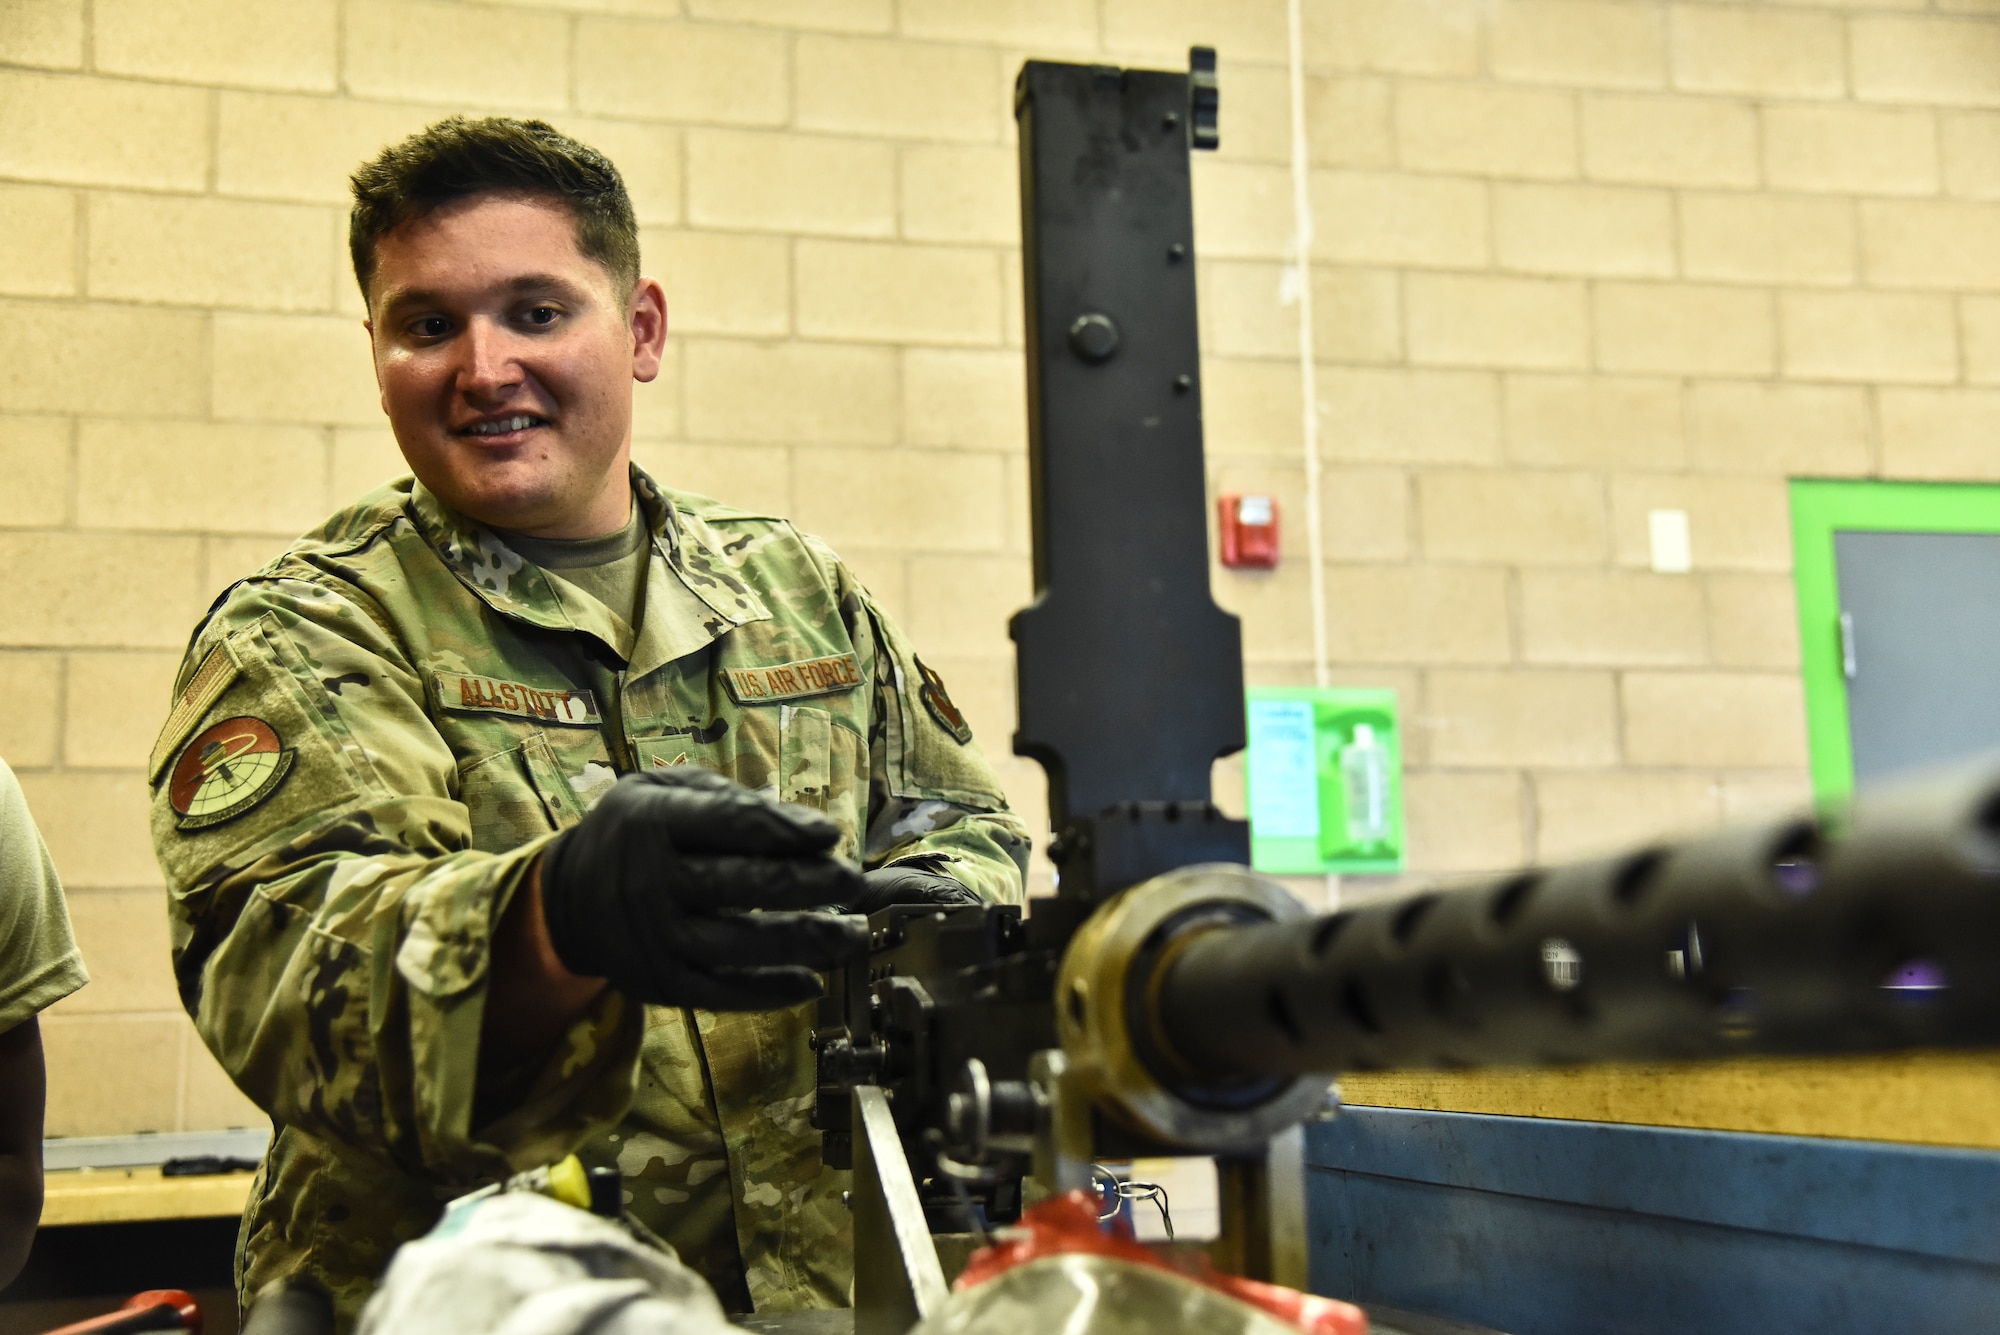 Tech. Sgt. Joe Allstott, 372d Training Squadron, Detachment 11, A-10C Thunderbolt II and HH-60G Pavehawk weapons instructor, demonstrates how to clean a GAU-18 at Davis-Monthan Air Force Base, Ariz., June 4, 2019. The 372d TRS, Det. 11, consists of 42 instructors responsible for training up to thousands of Airmen a year on different kinds of aircraft maintenance. (U.S. Air Force photo by Senior Airman Mya M. Crosby)